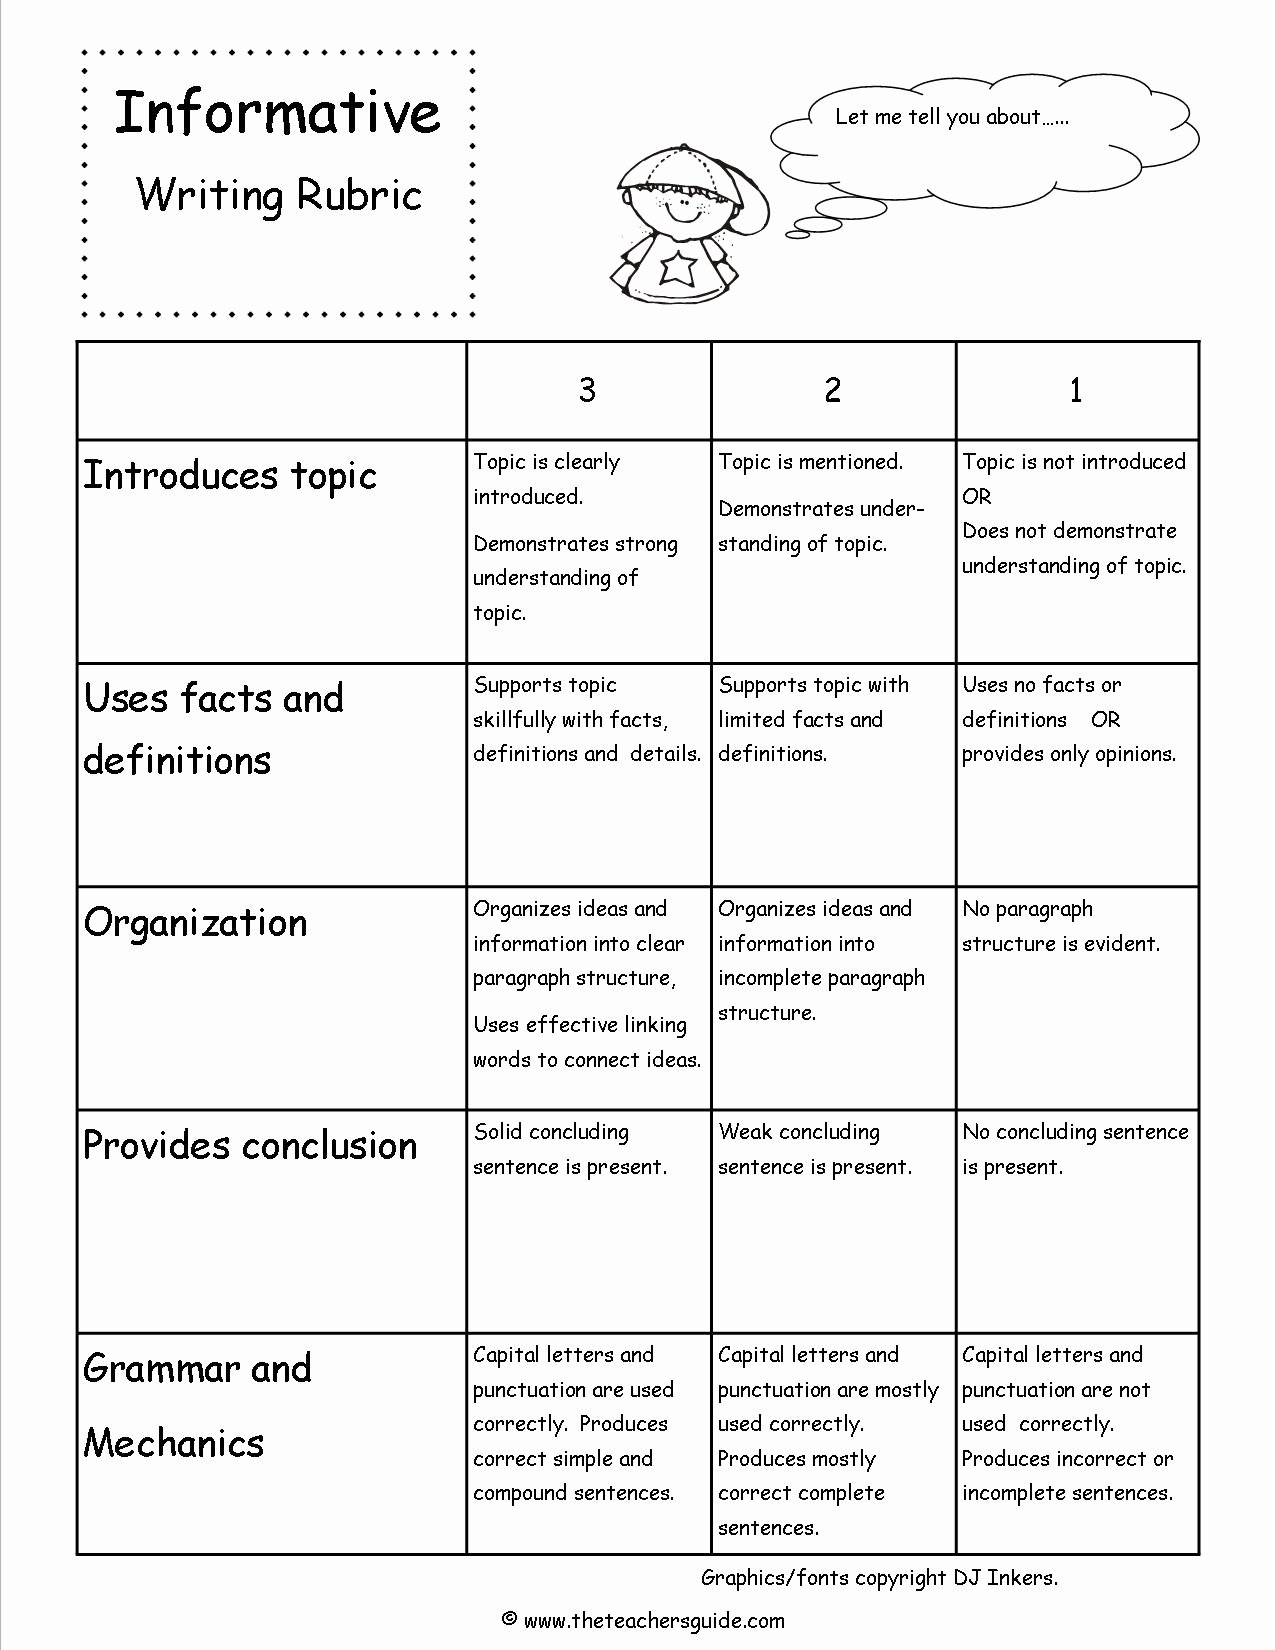 Examples Of Informative Writing Fresh Informative Writing Lesson Plans themes Printouts Crafts